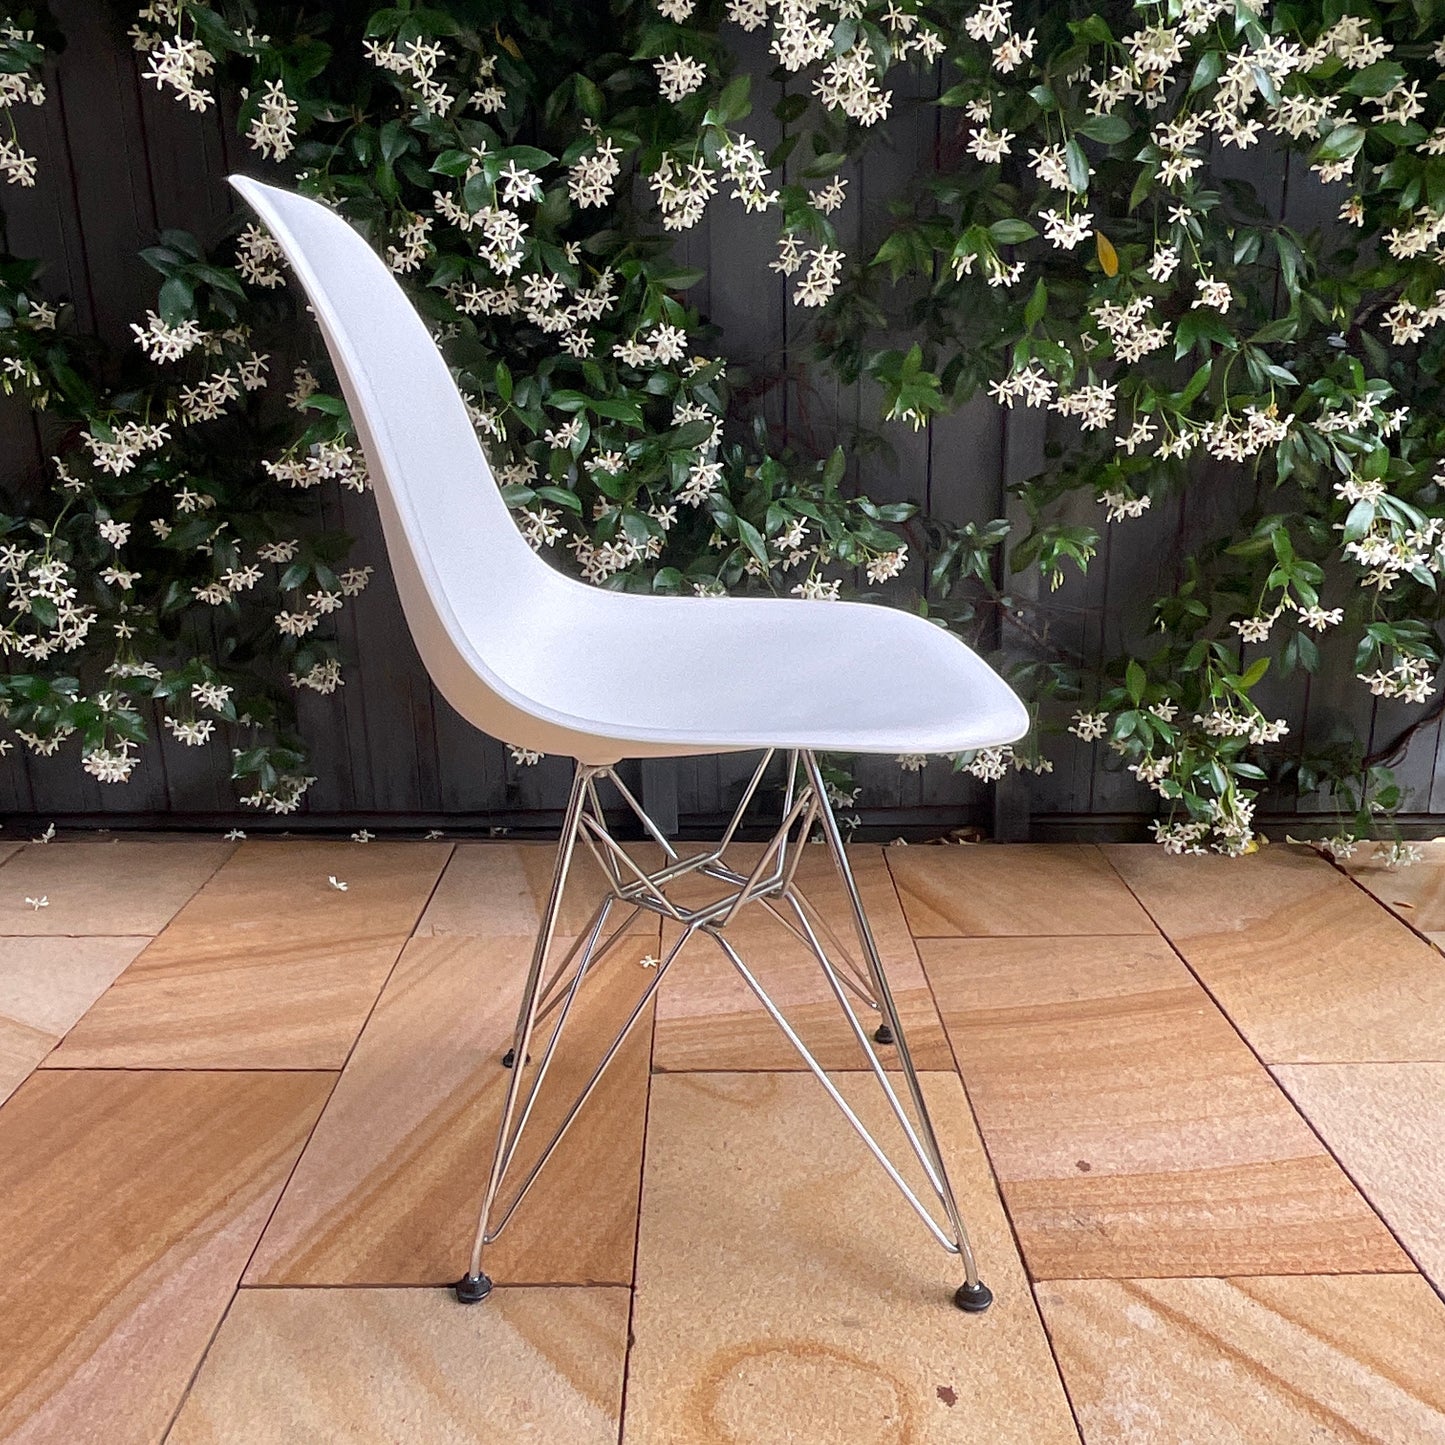 Set of FOUR Eames Eiffel Tower Chairs by Vitra (2 sets available)